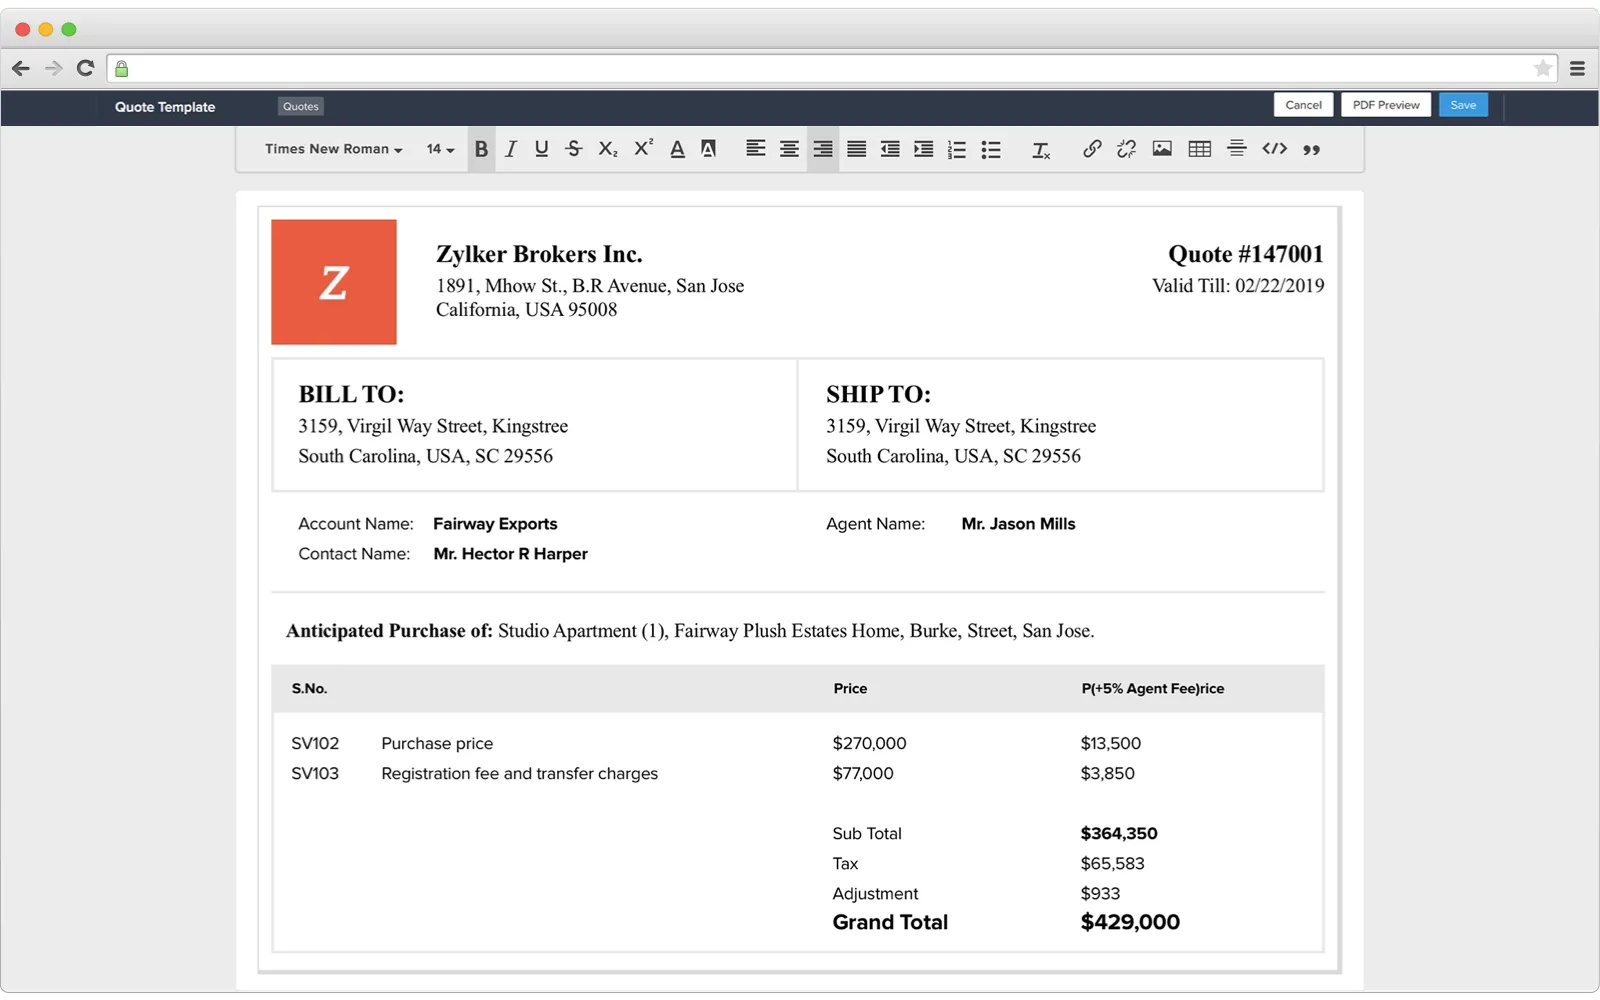 Quote interface in Zoho CRM for real estate